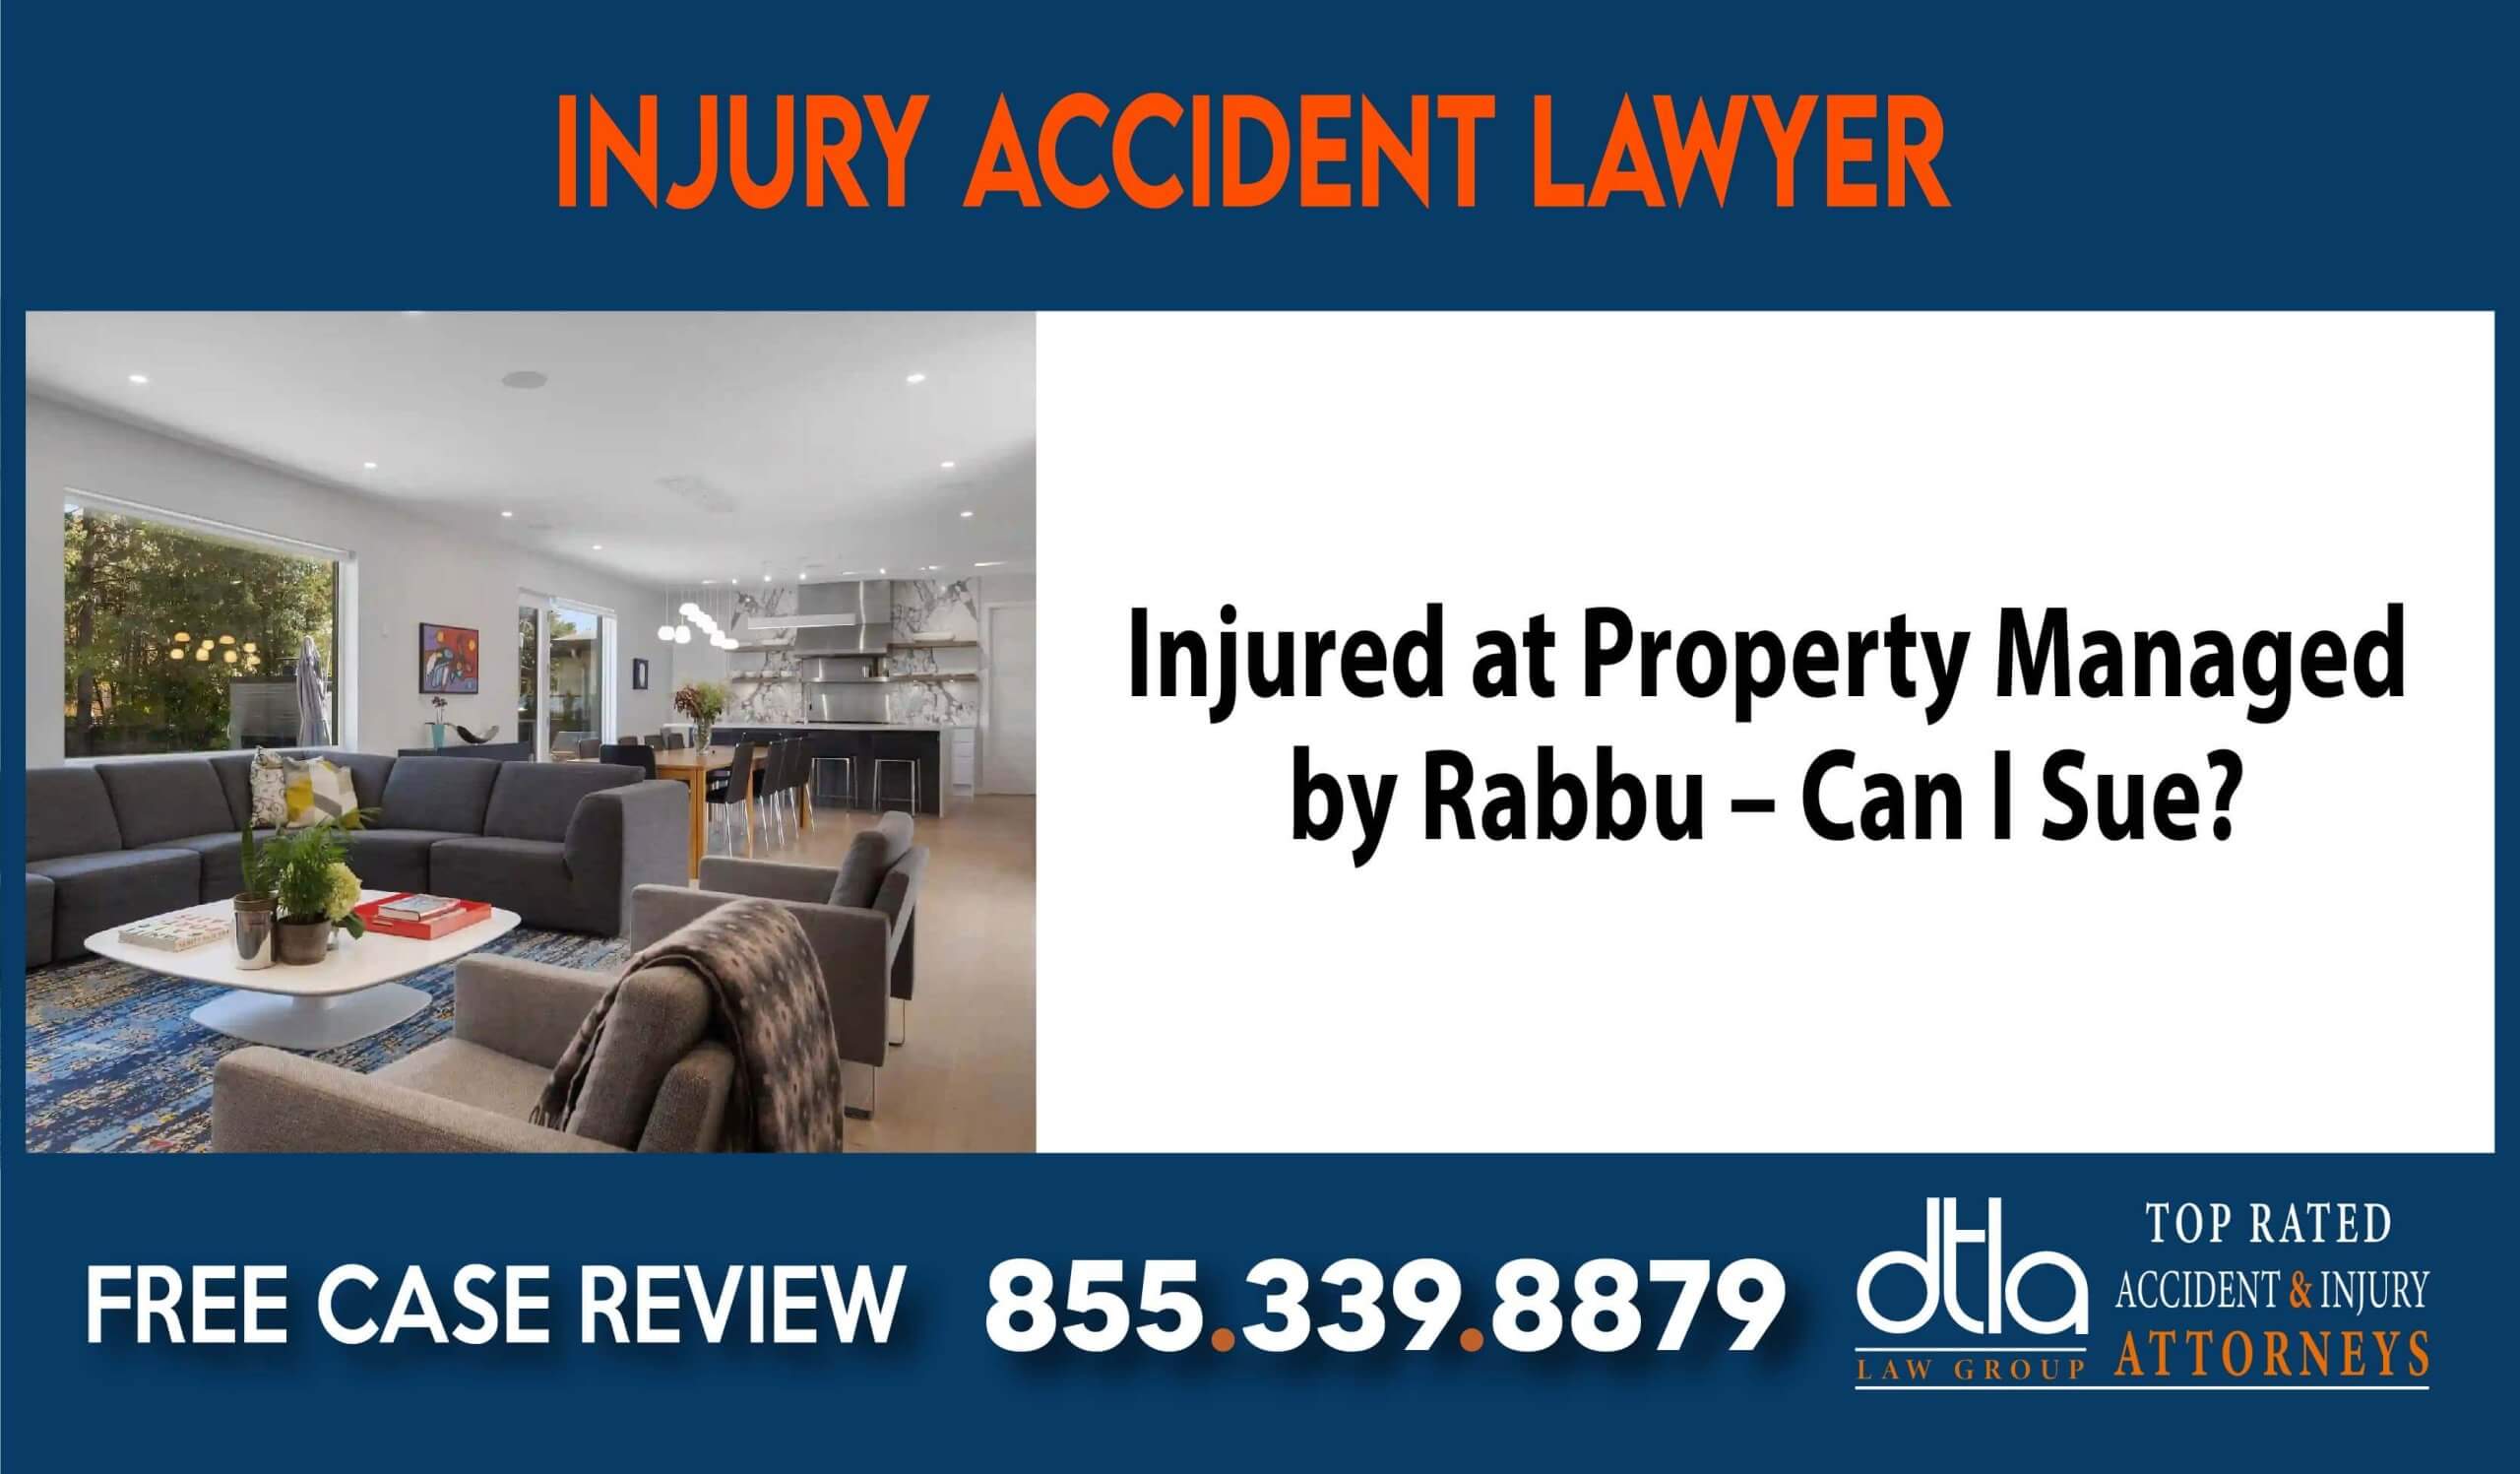 Injured at Property Managed by Rabbu Can I Sue lawyer attorney compensation incident liability